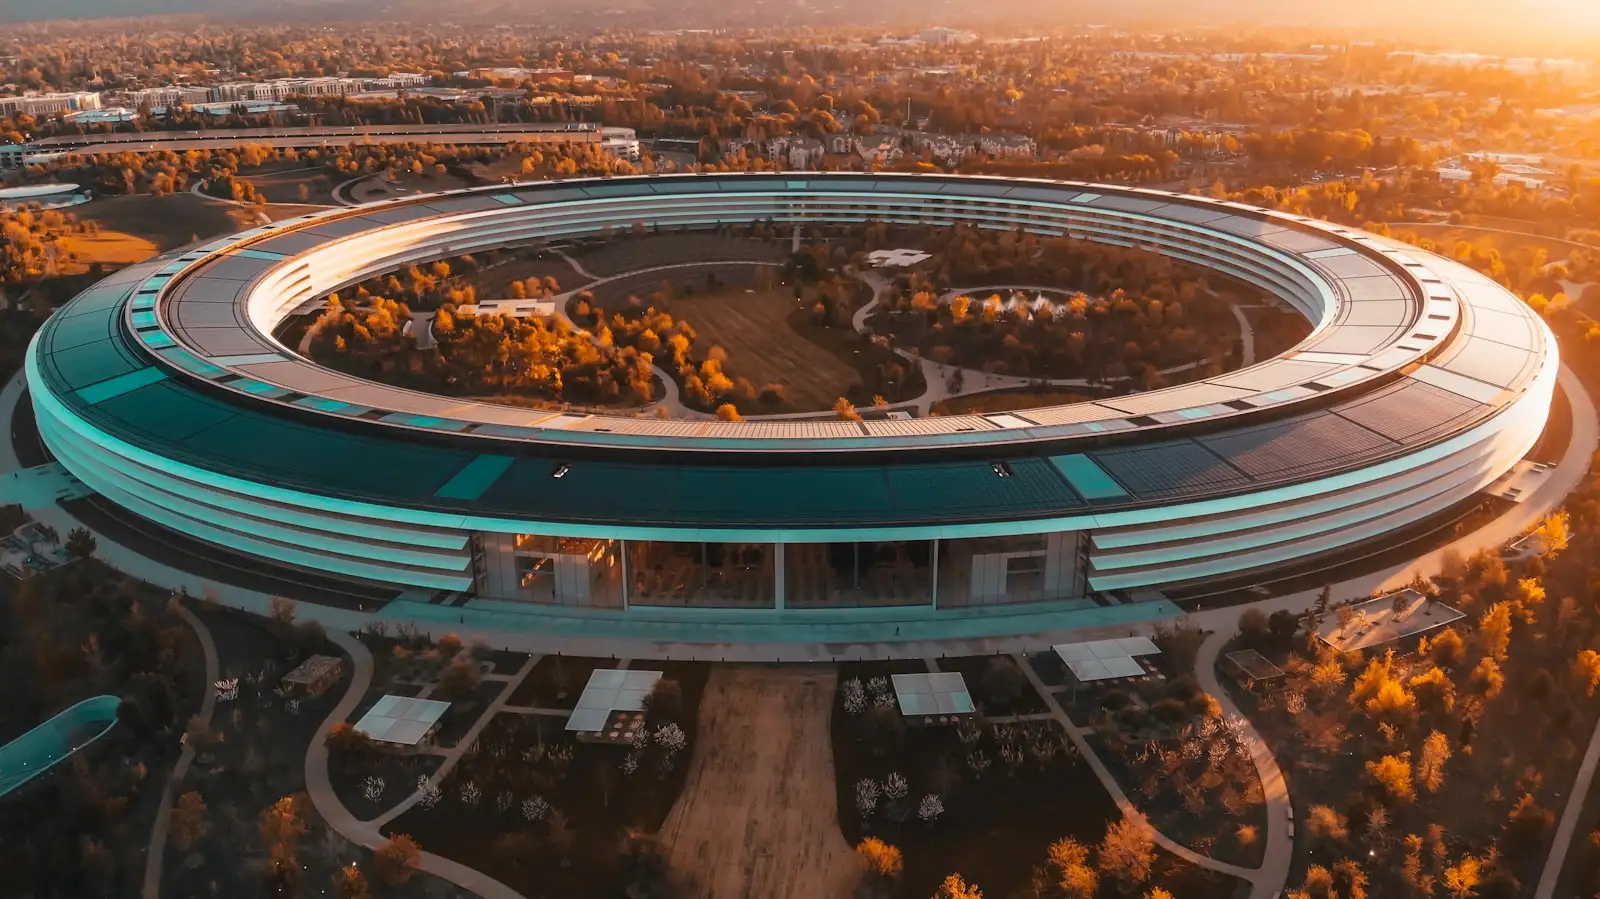 Are These Places In The US Or The UK Quiz Apple Park in Cupertino, California, USA